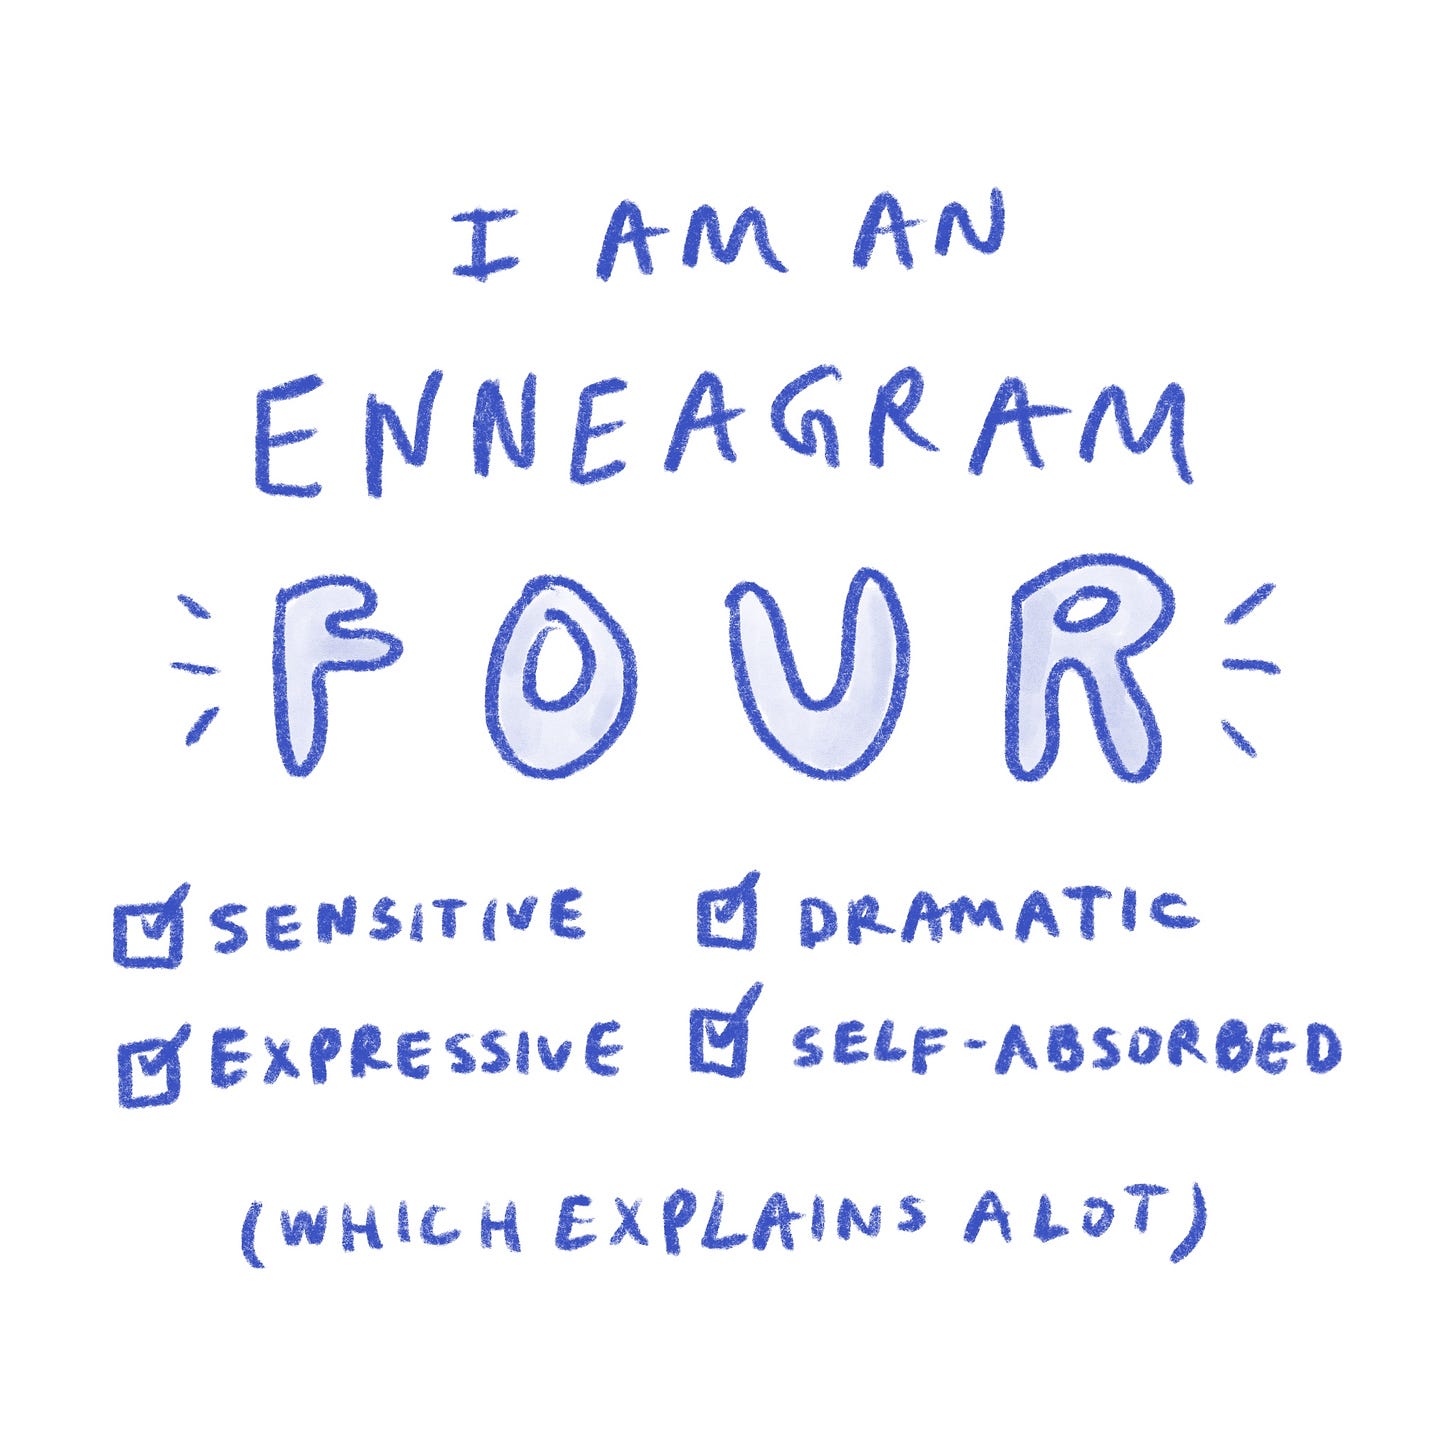 I am an enneagram four (which explains a lot): sensitive, expressive, dramatic, self-absorbed